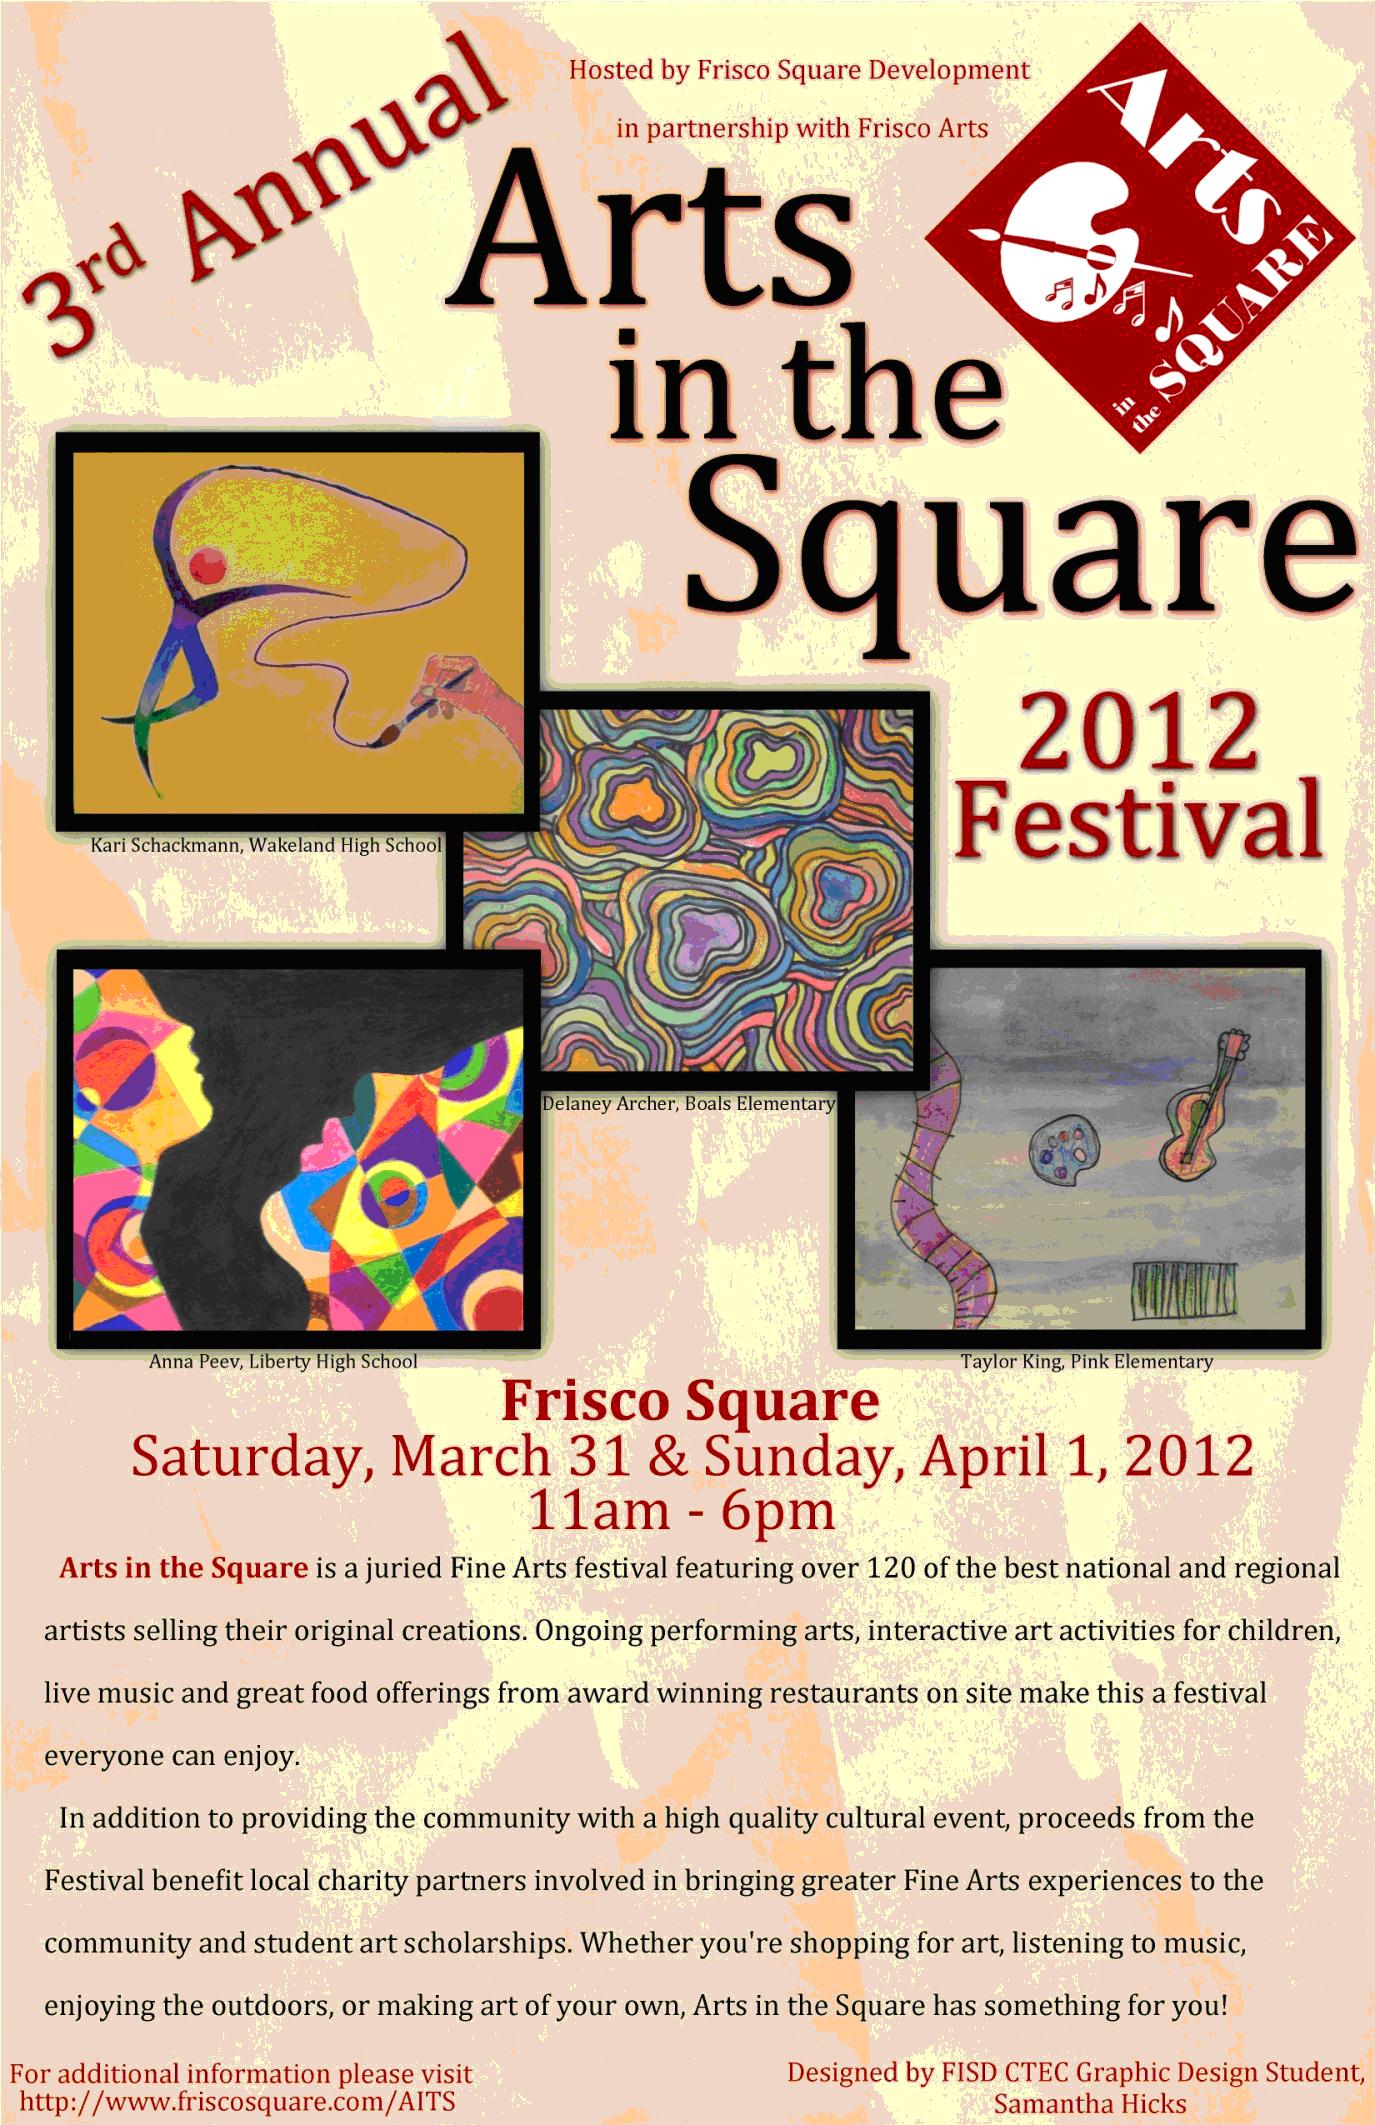 Arts in the Square student poster contest winner named